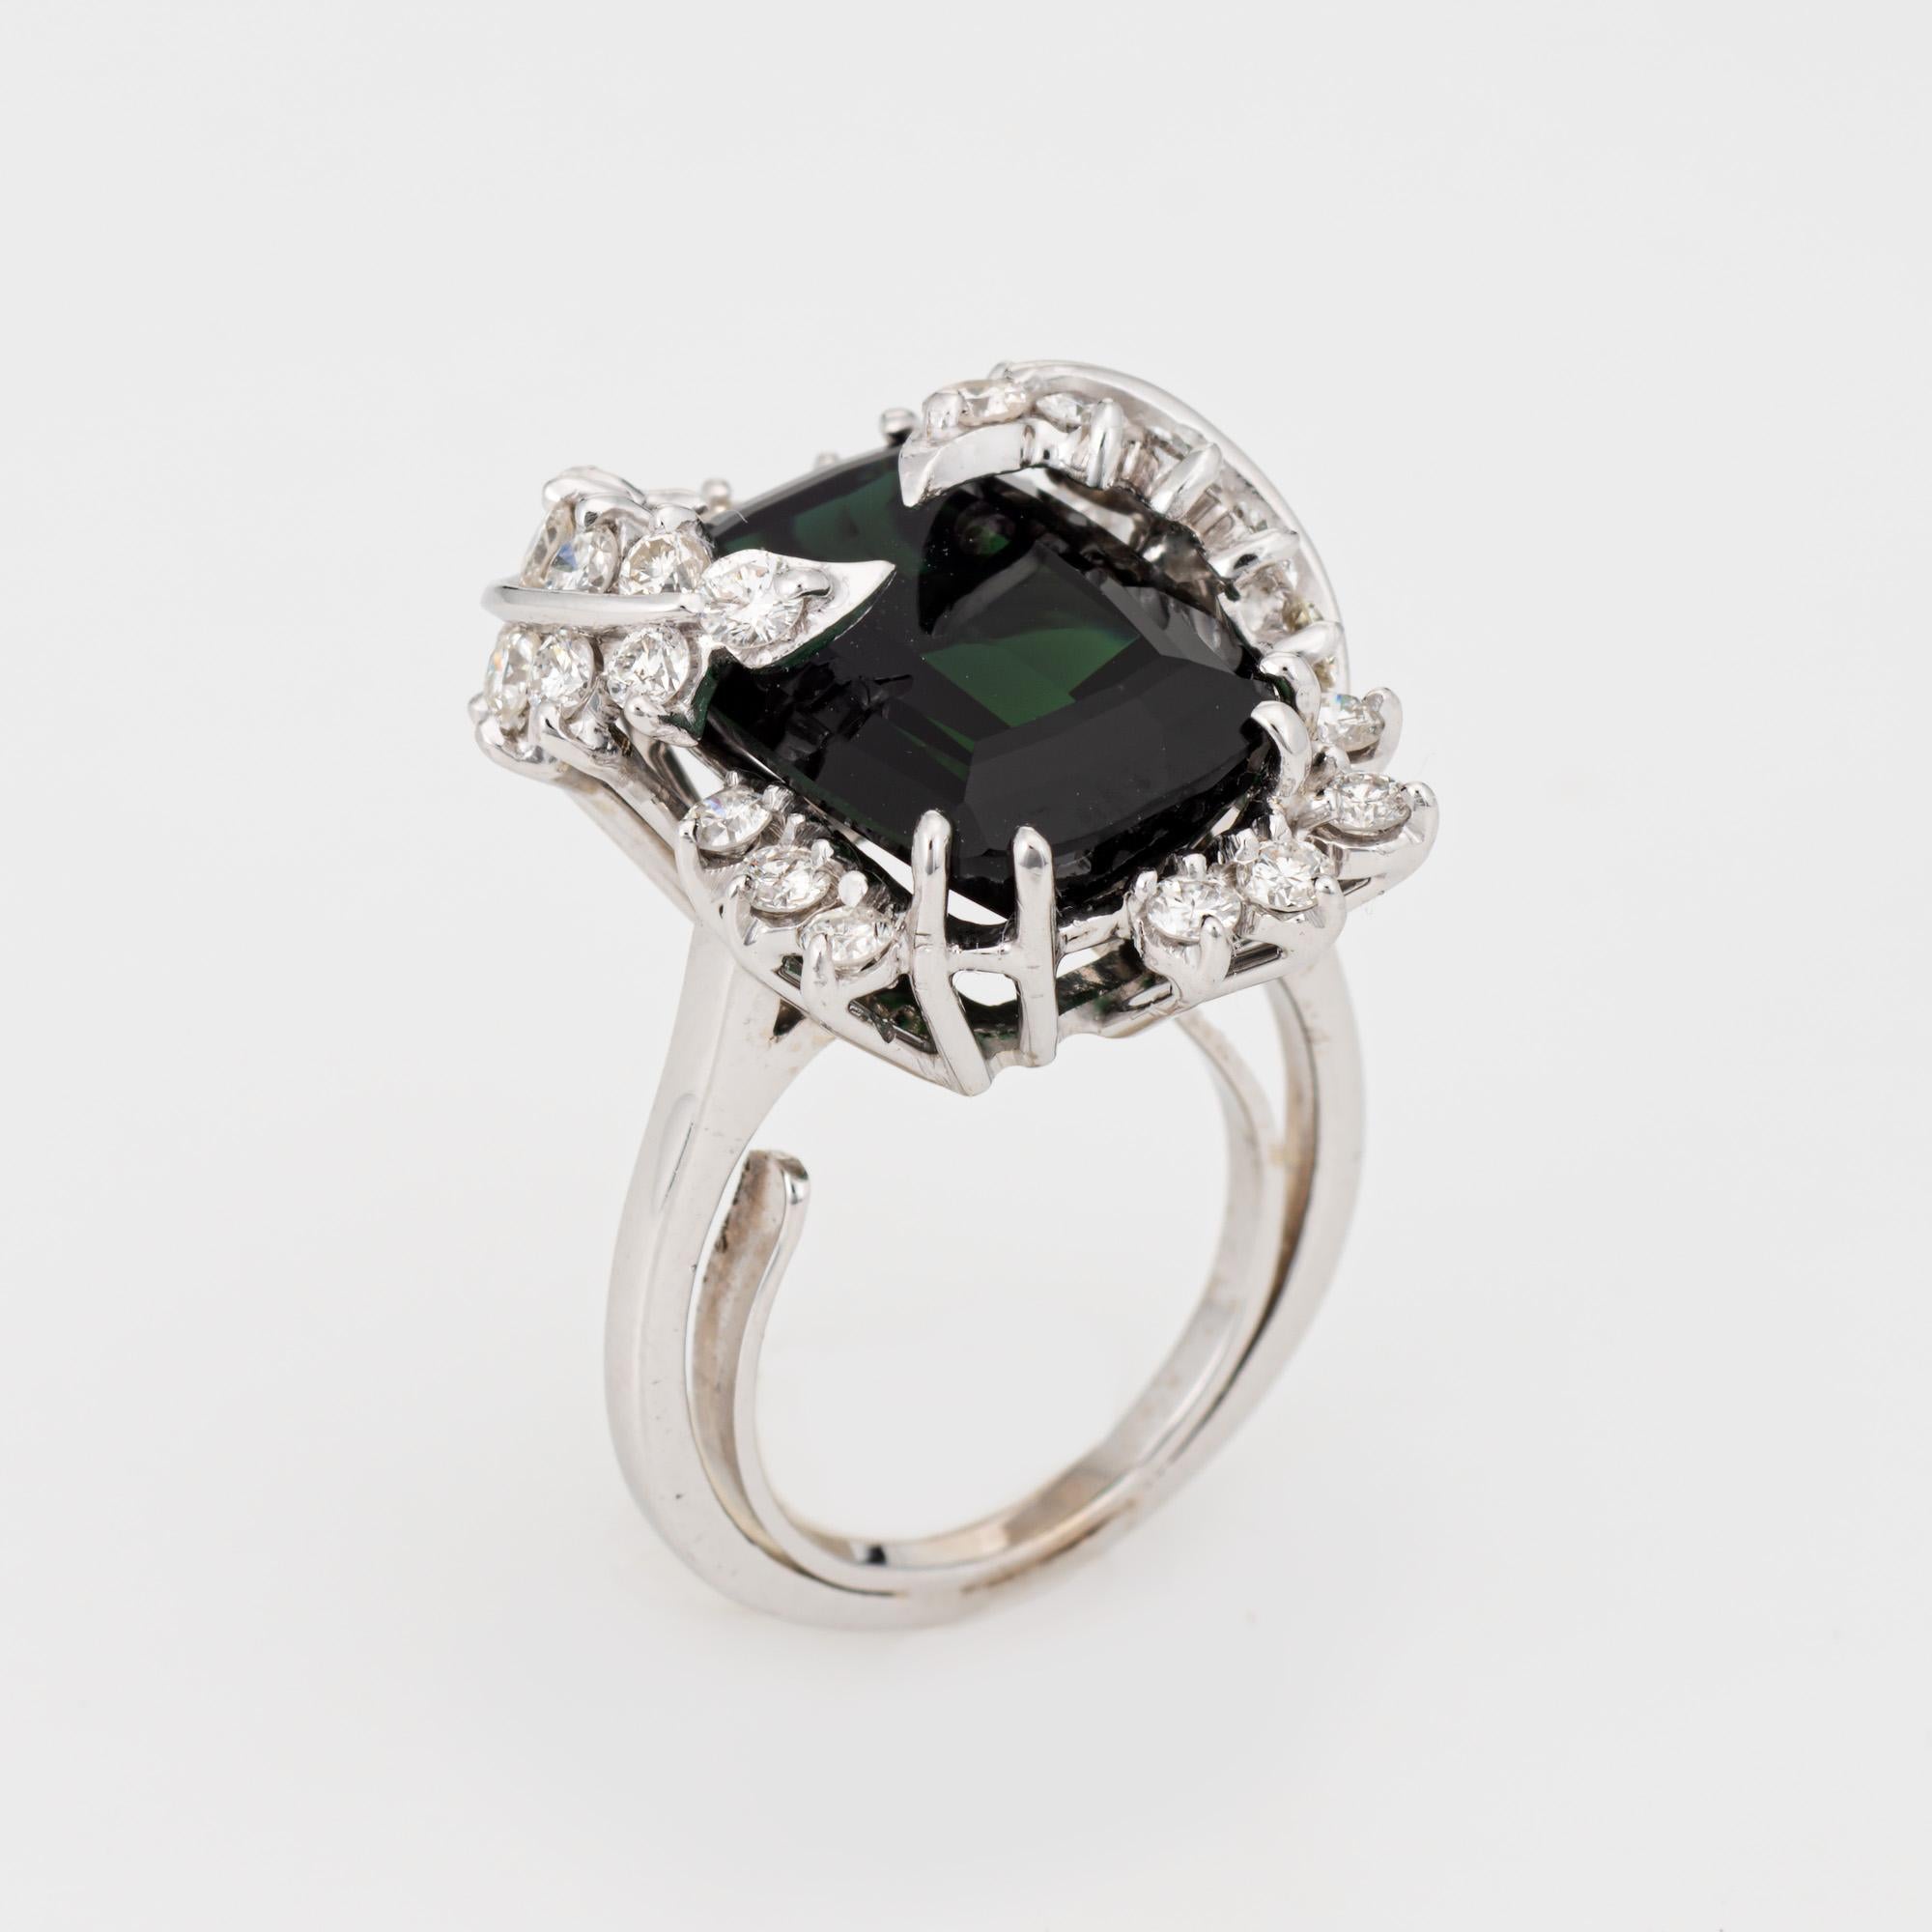 Stylish vintage green tourmaline & diamond leaf ring crafted in 14 karat white gold. 

Green tourmaline measures 15.5mm x 10mm (estimated at 7 carats), accented with an estimated 1.151 carats of diamonds (estimated at H-I color and VS2-SI2 clarity).